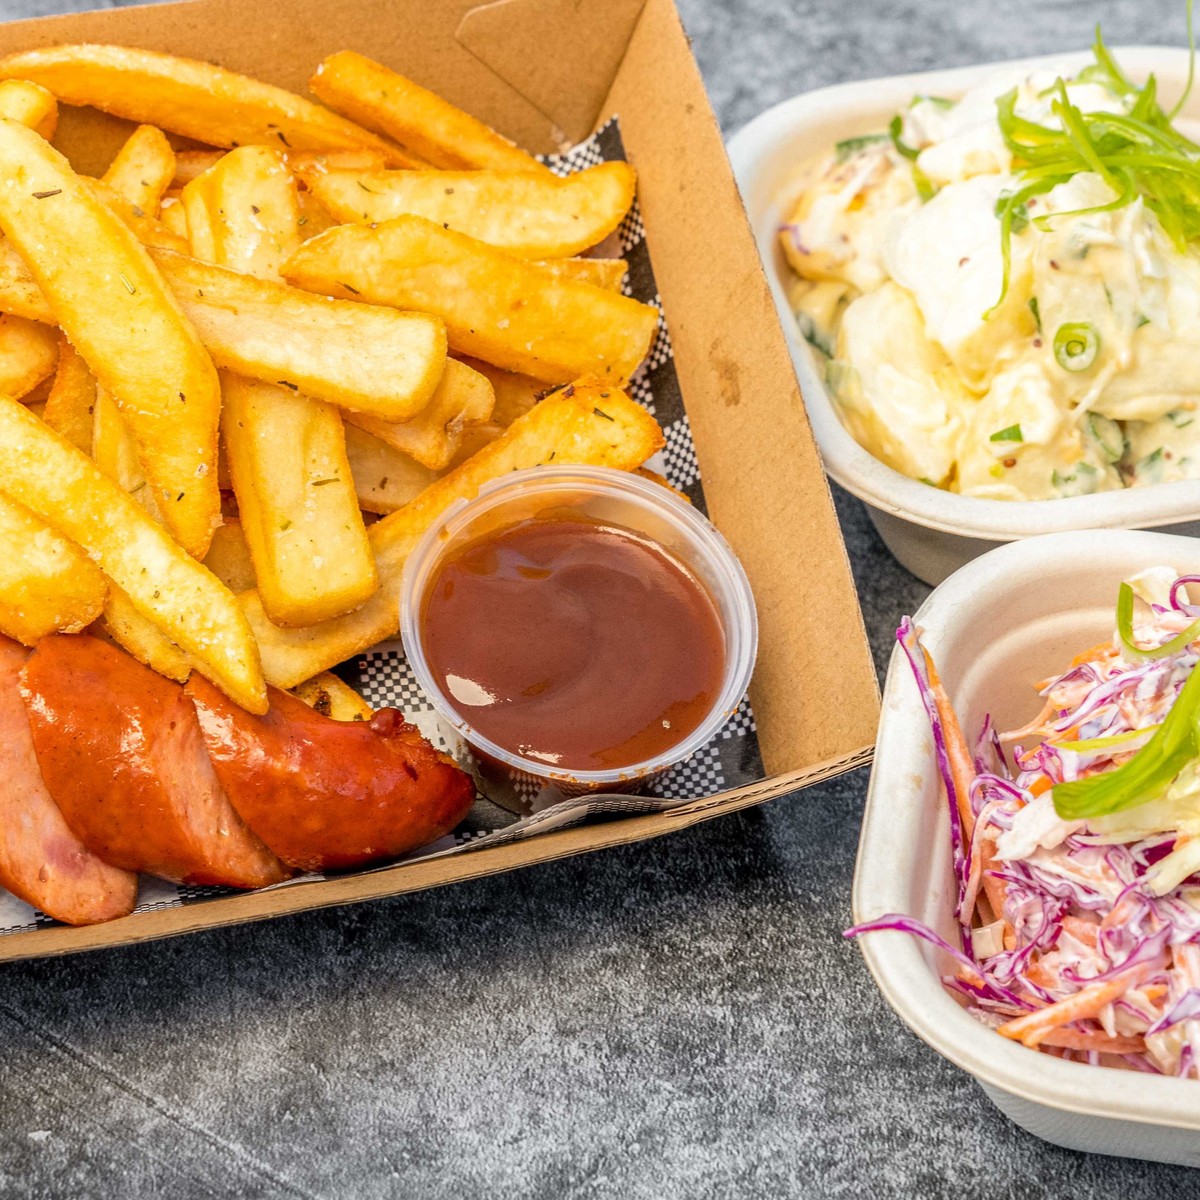 Hells Bellz Smokehouse Menu Takeout in Melbourne, Delivery Menu & Prices